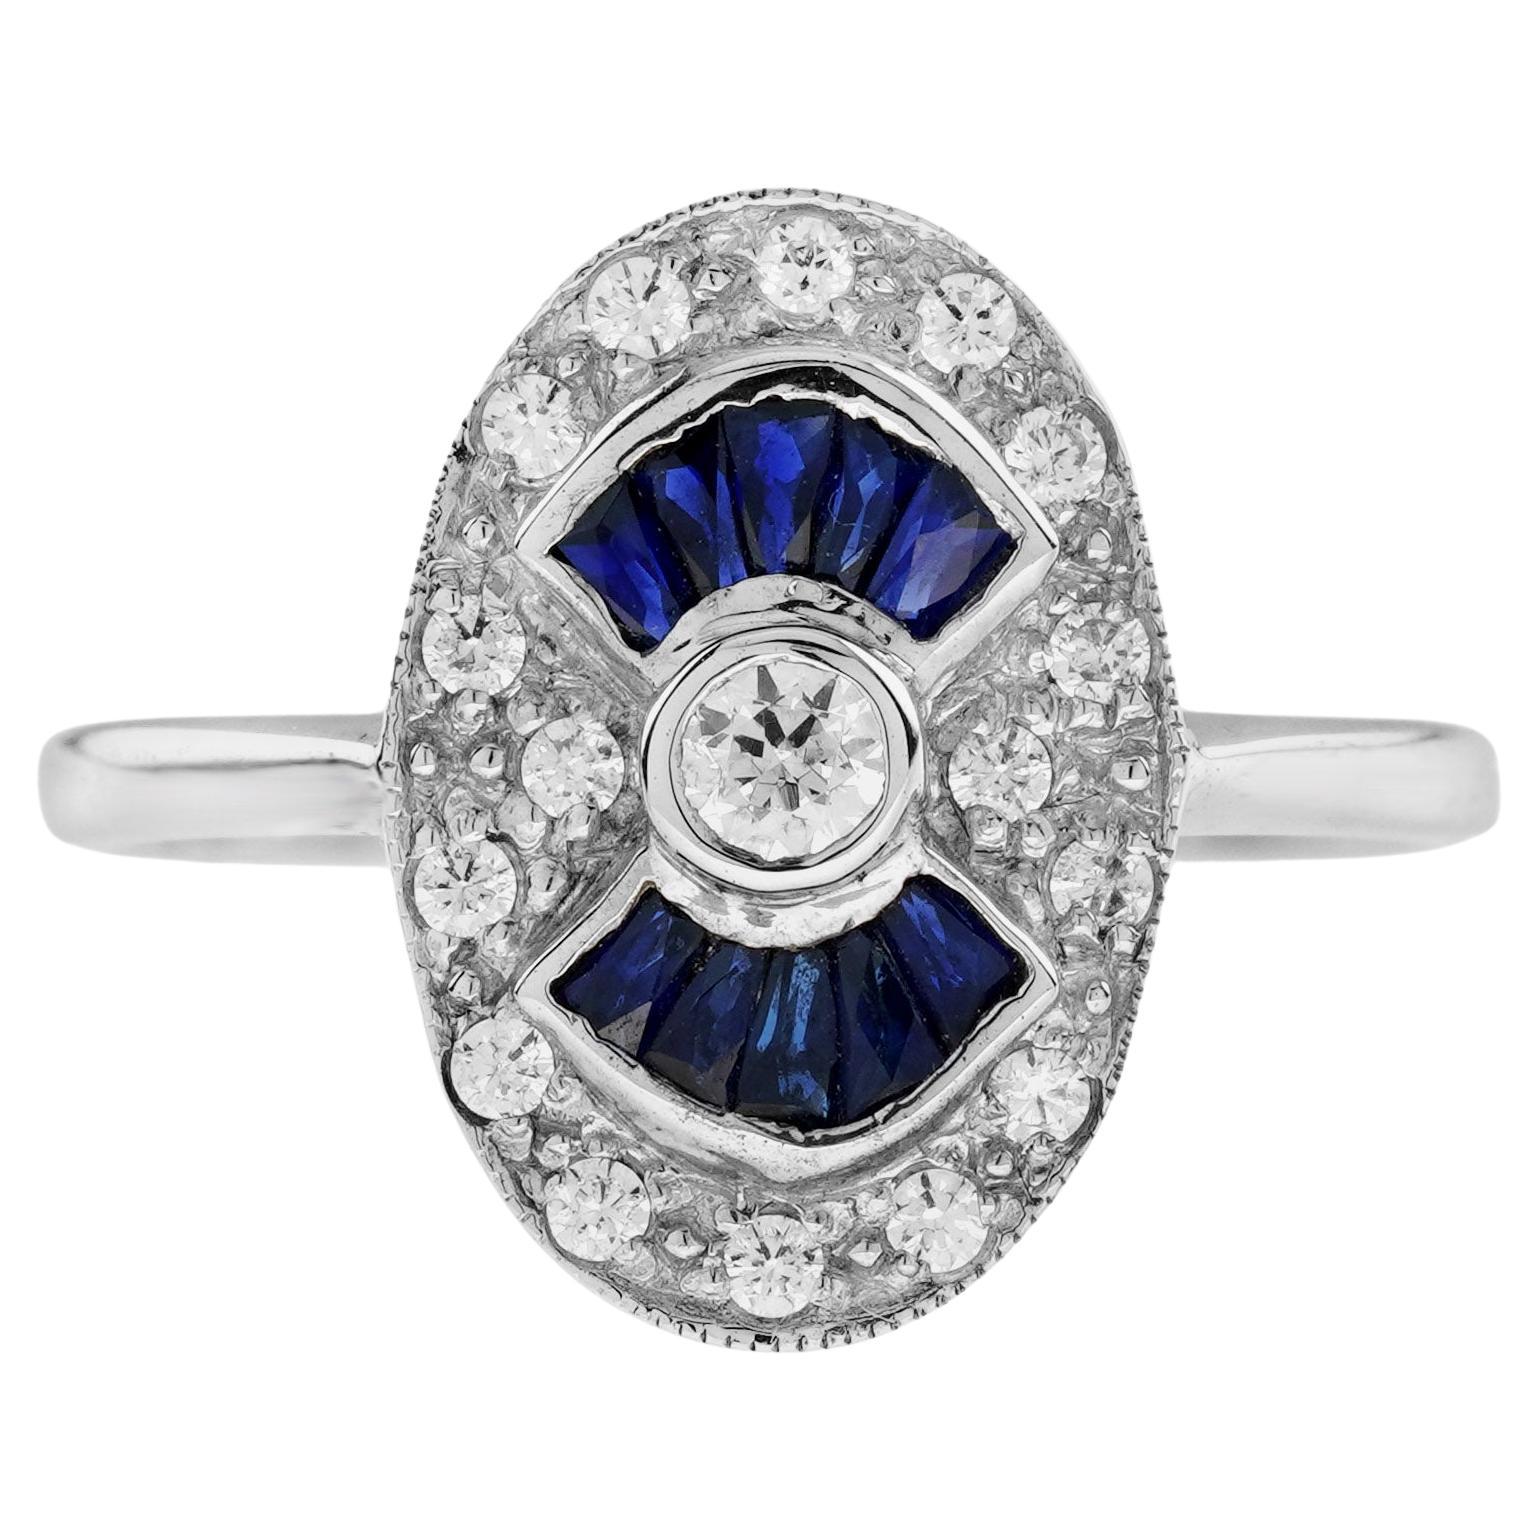 For Sale:  Diamond and Blue Sapphire Art Deco Style Oval Shaped Ring in 14K White Gold